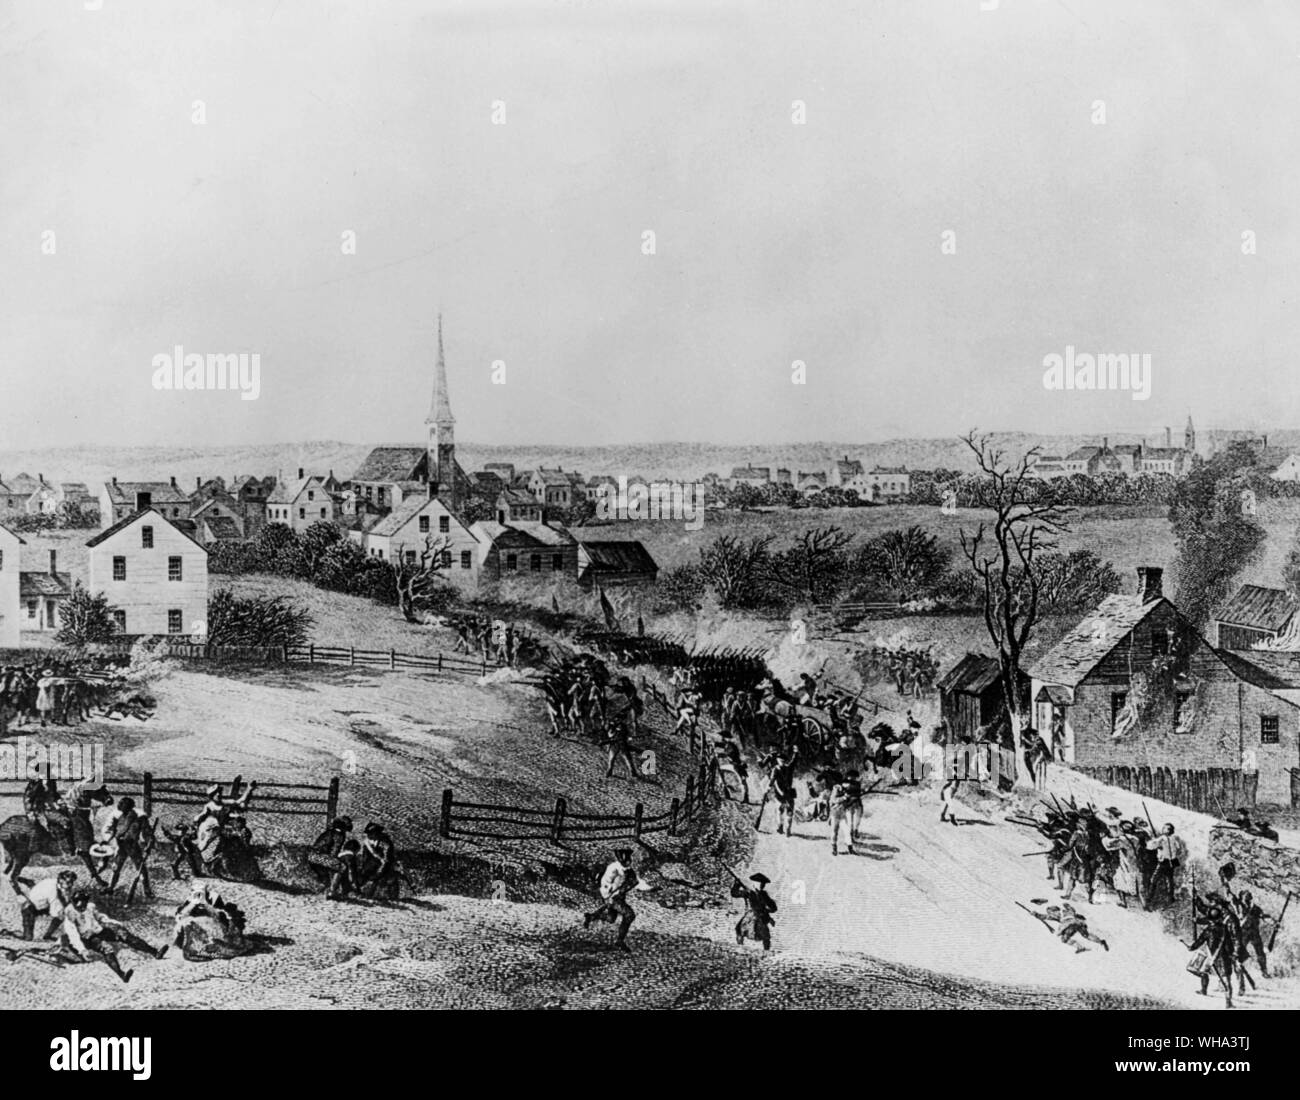 USA: Concord, Massachusettes. One of the first incidents of the American war of Independence. Stock Photo